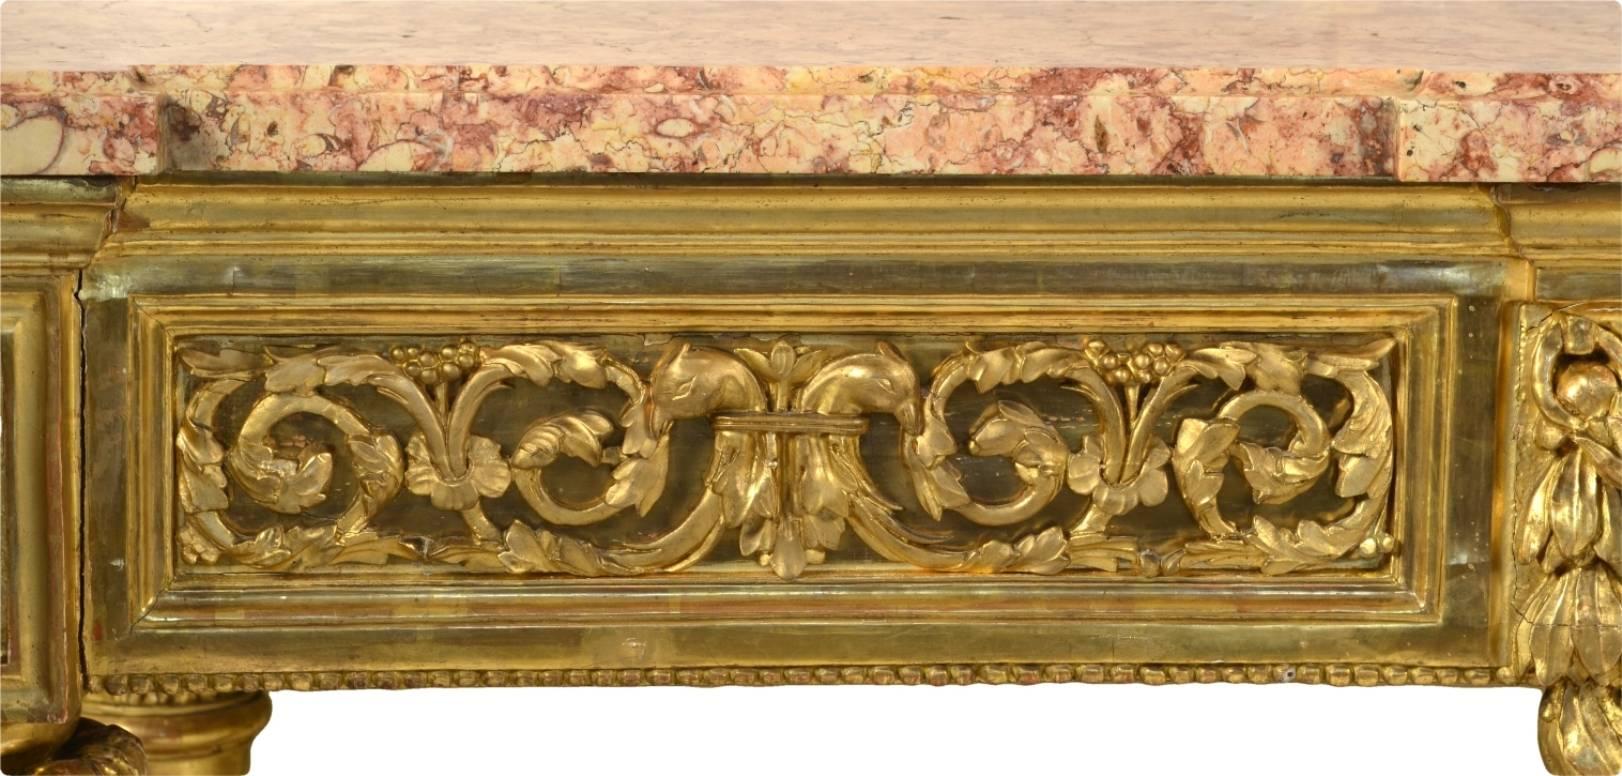 Italian Carved and Giltwood Neoclassical Console Table, circa 1790-1800 For Sale 2